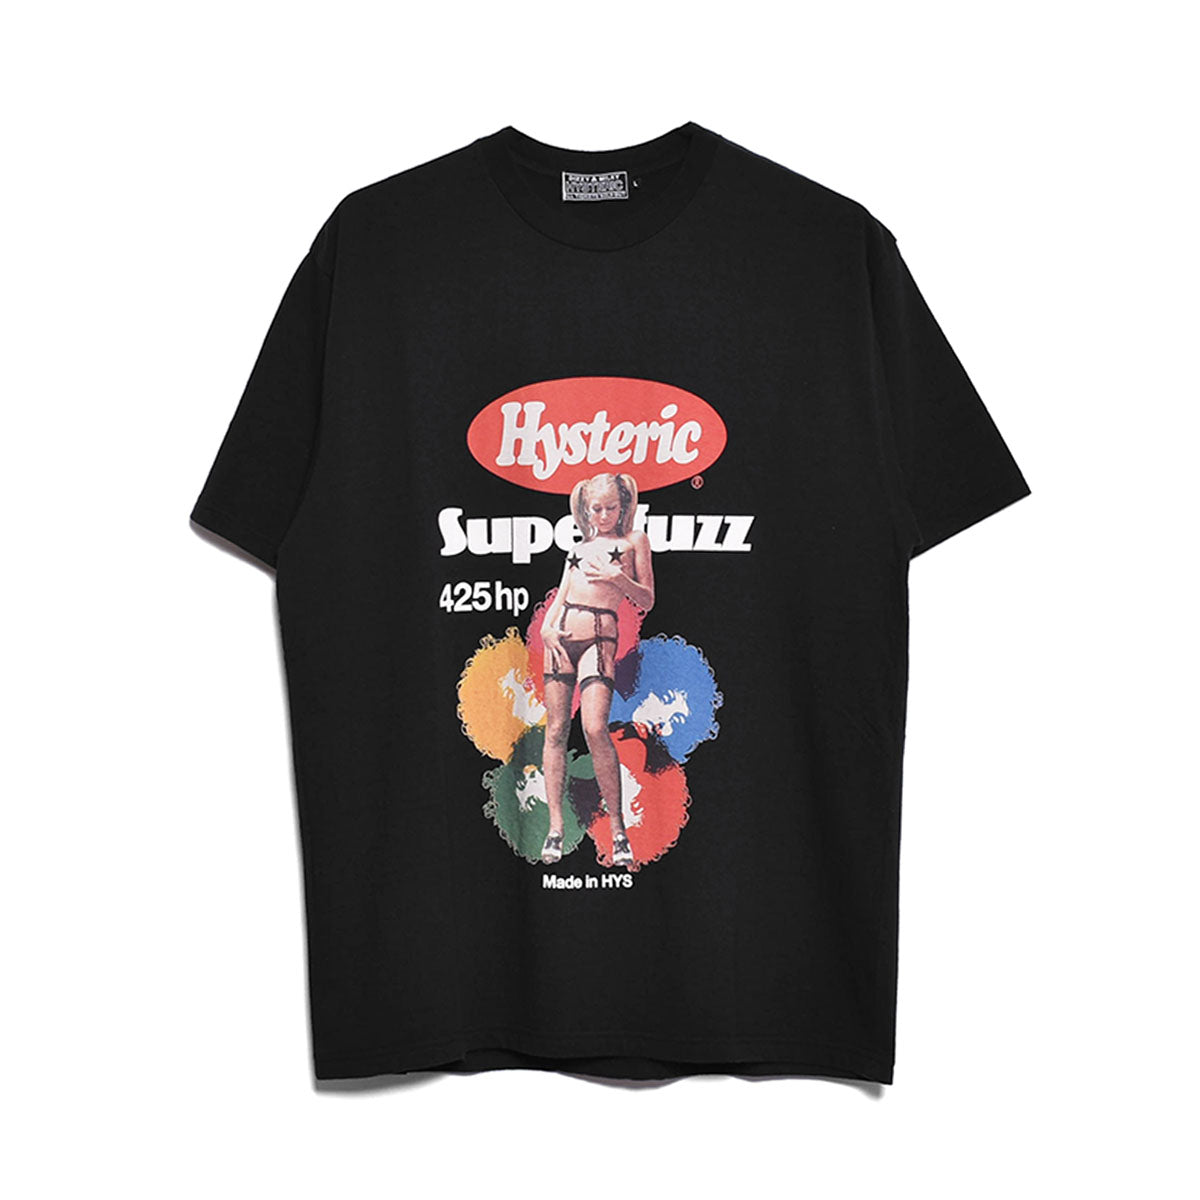 HYSTEHYSTERIC GLAMOUR PAINTERS Tシャツ